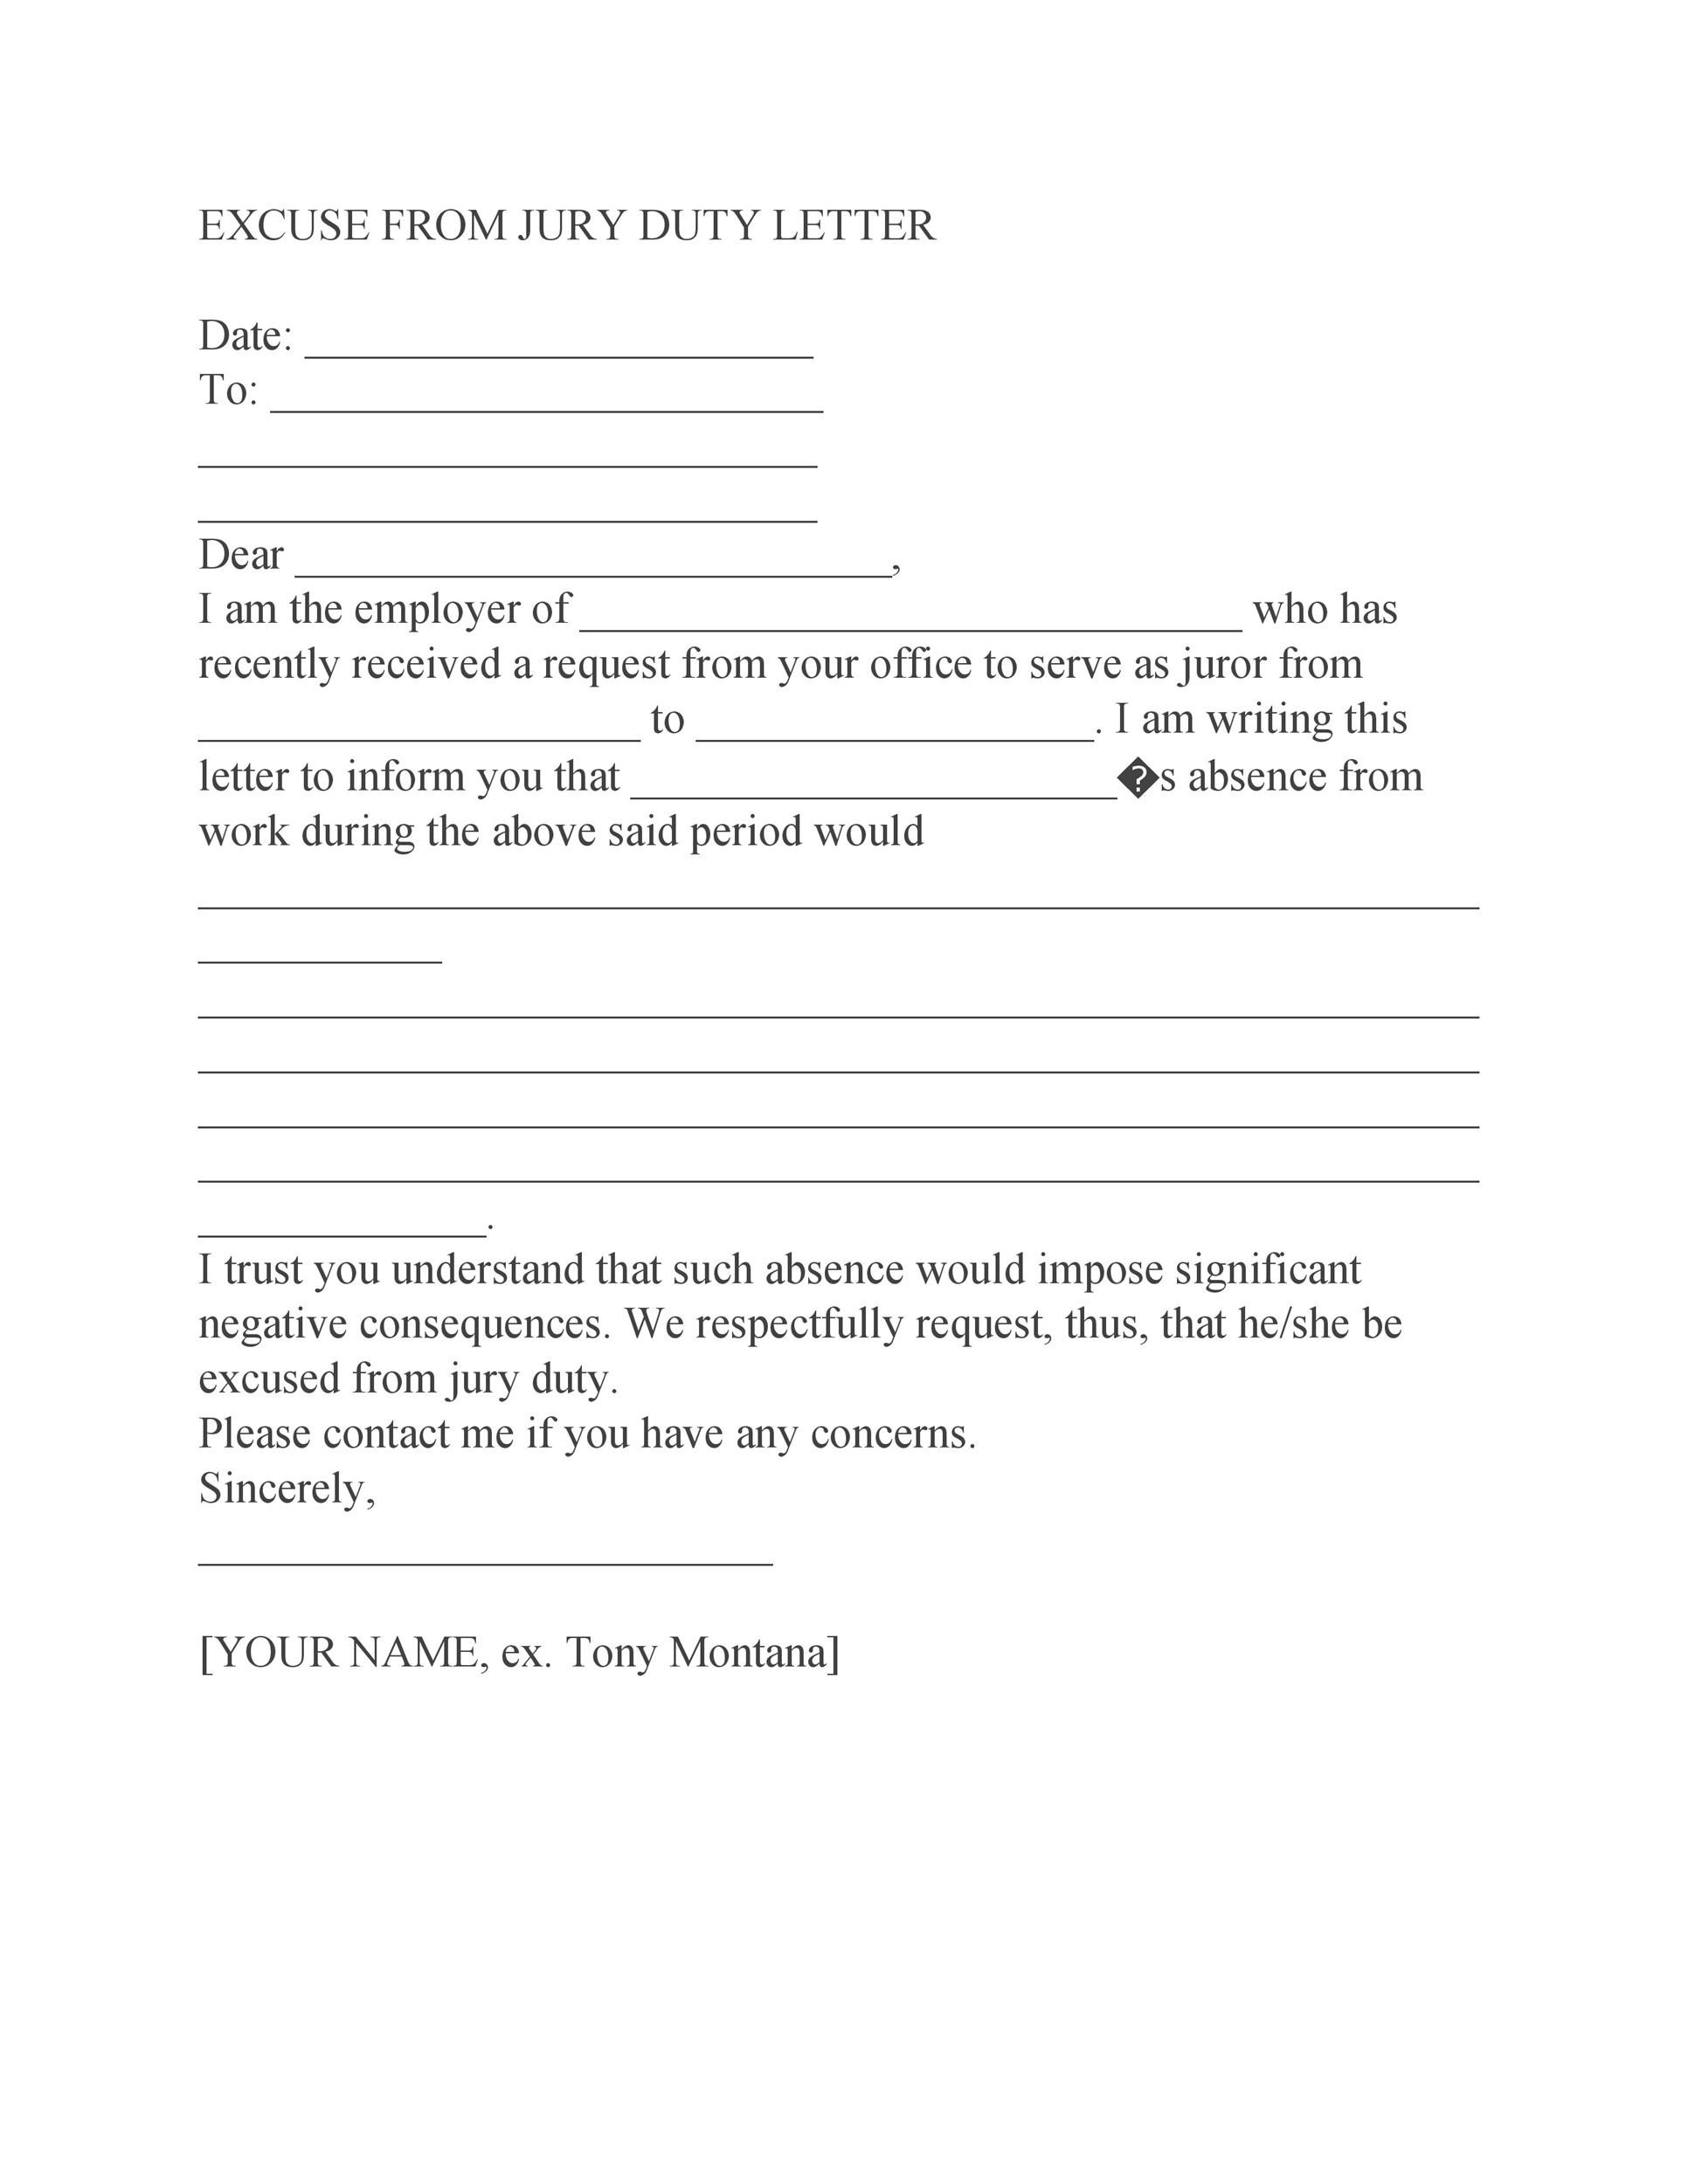 Free jury duty excuse letter template 01